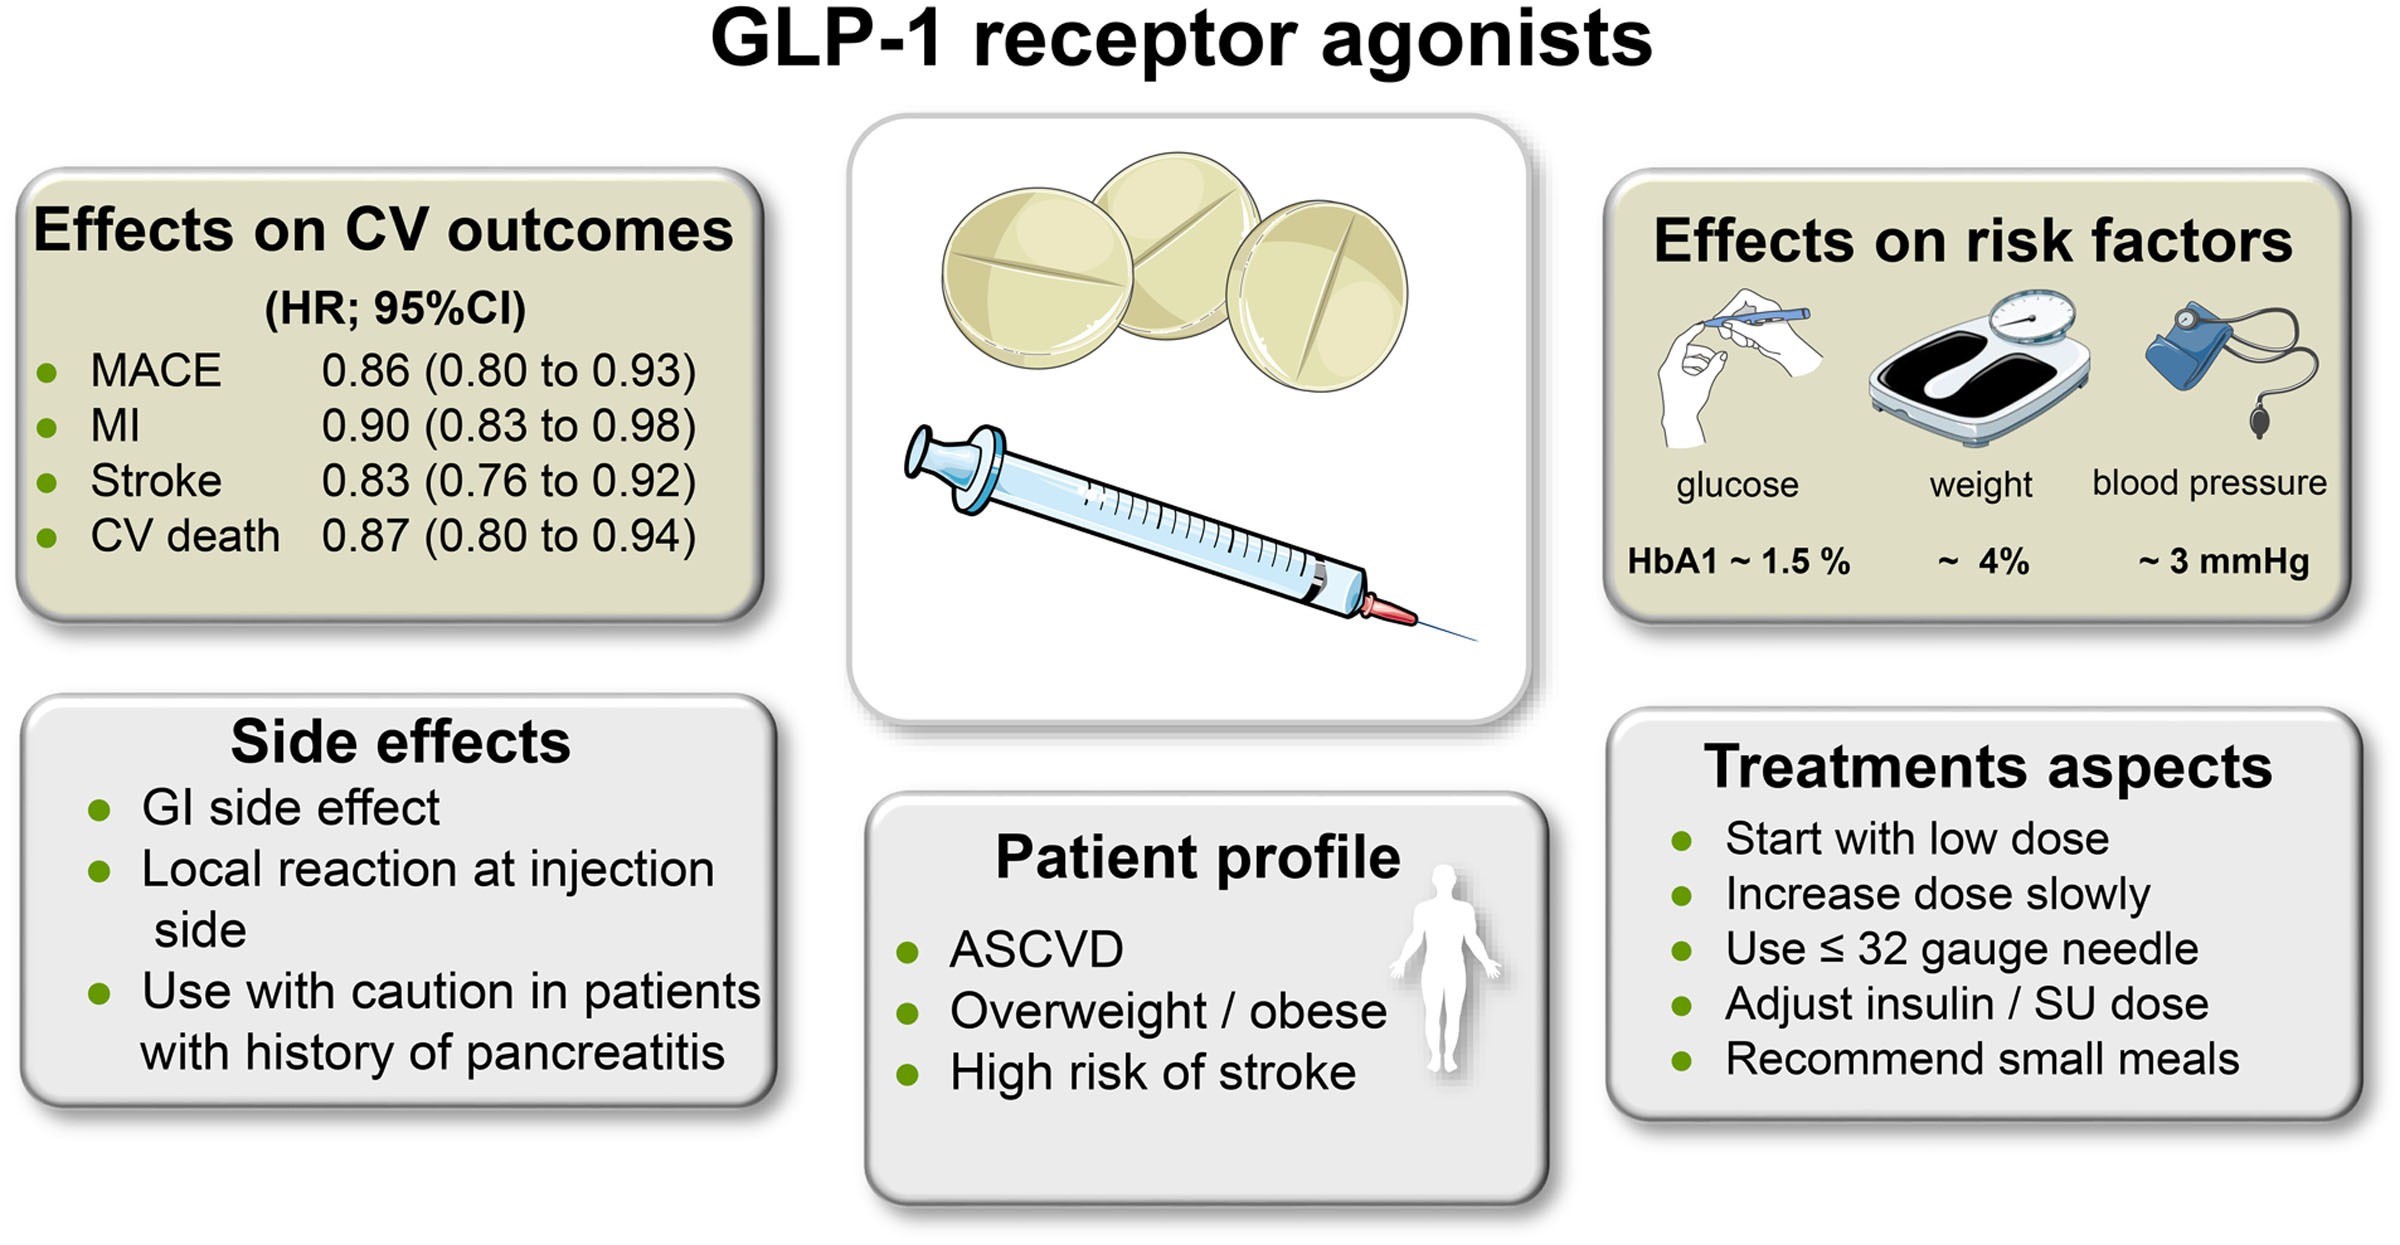 GLP-1 Receptor Agonists for the Reduction of Atherosclerotic Cardiovascular Risk in Patients With Type 2 Diabetes